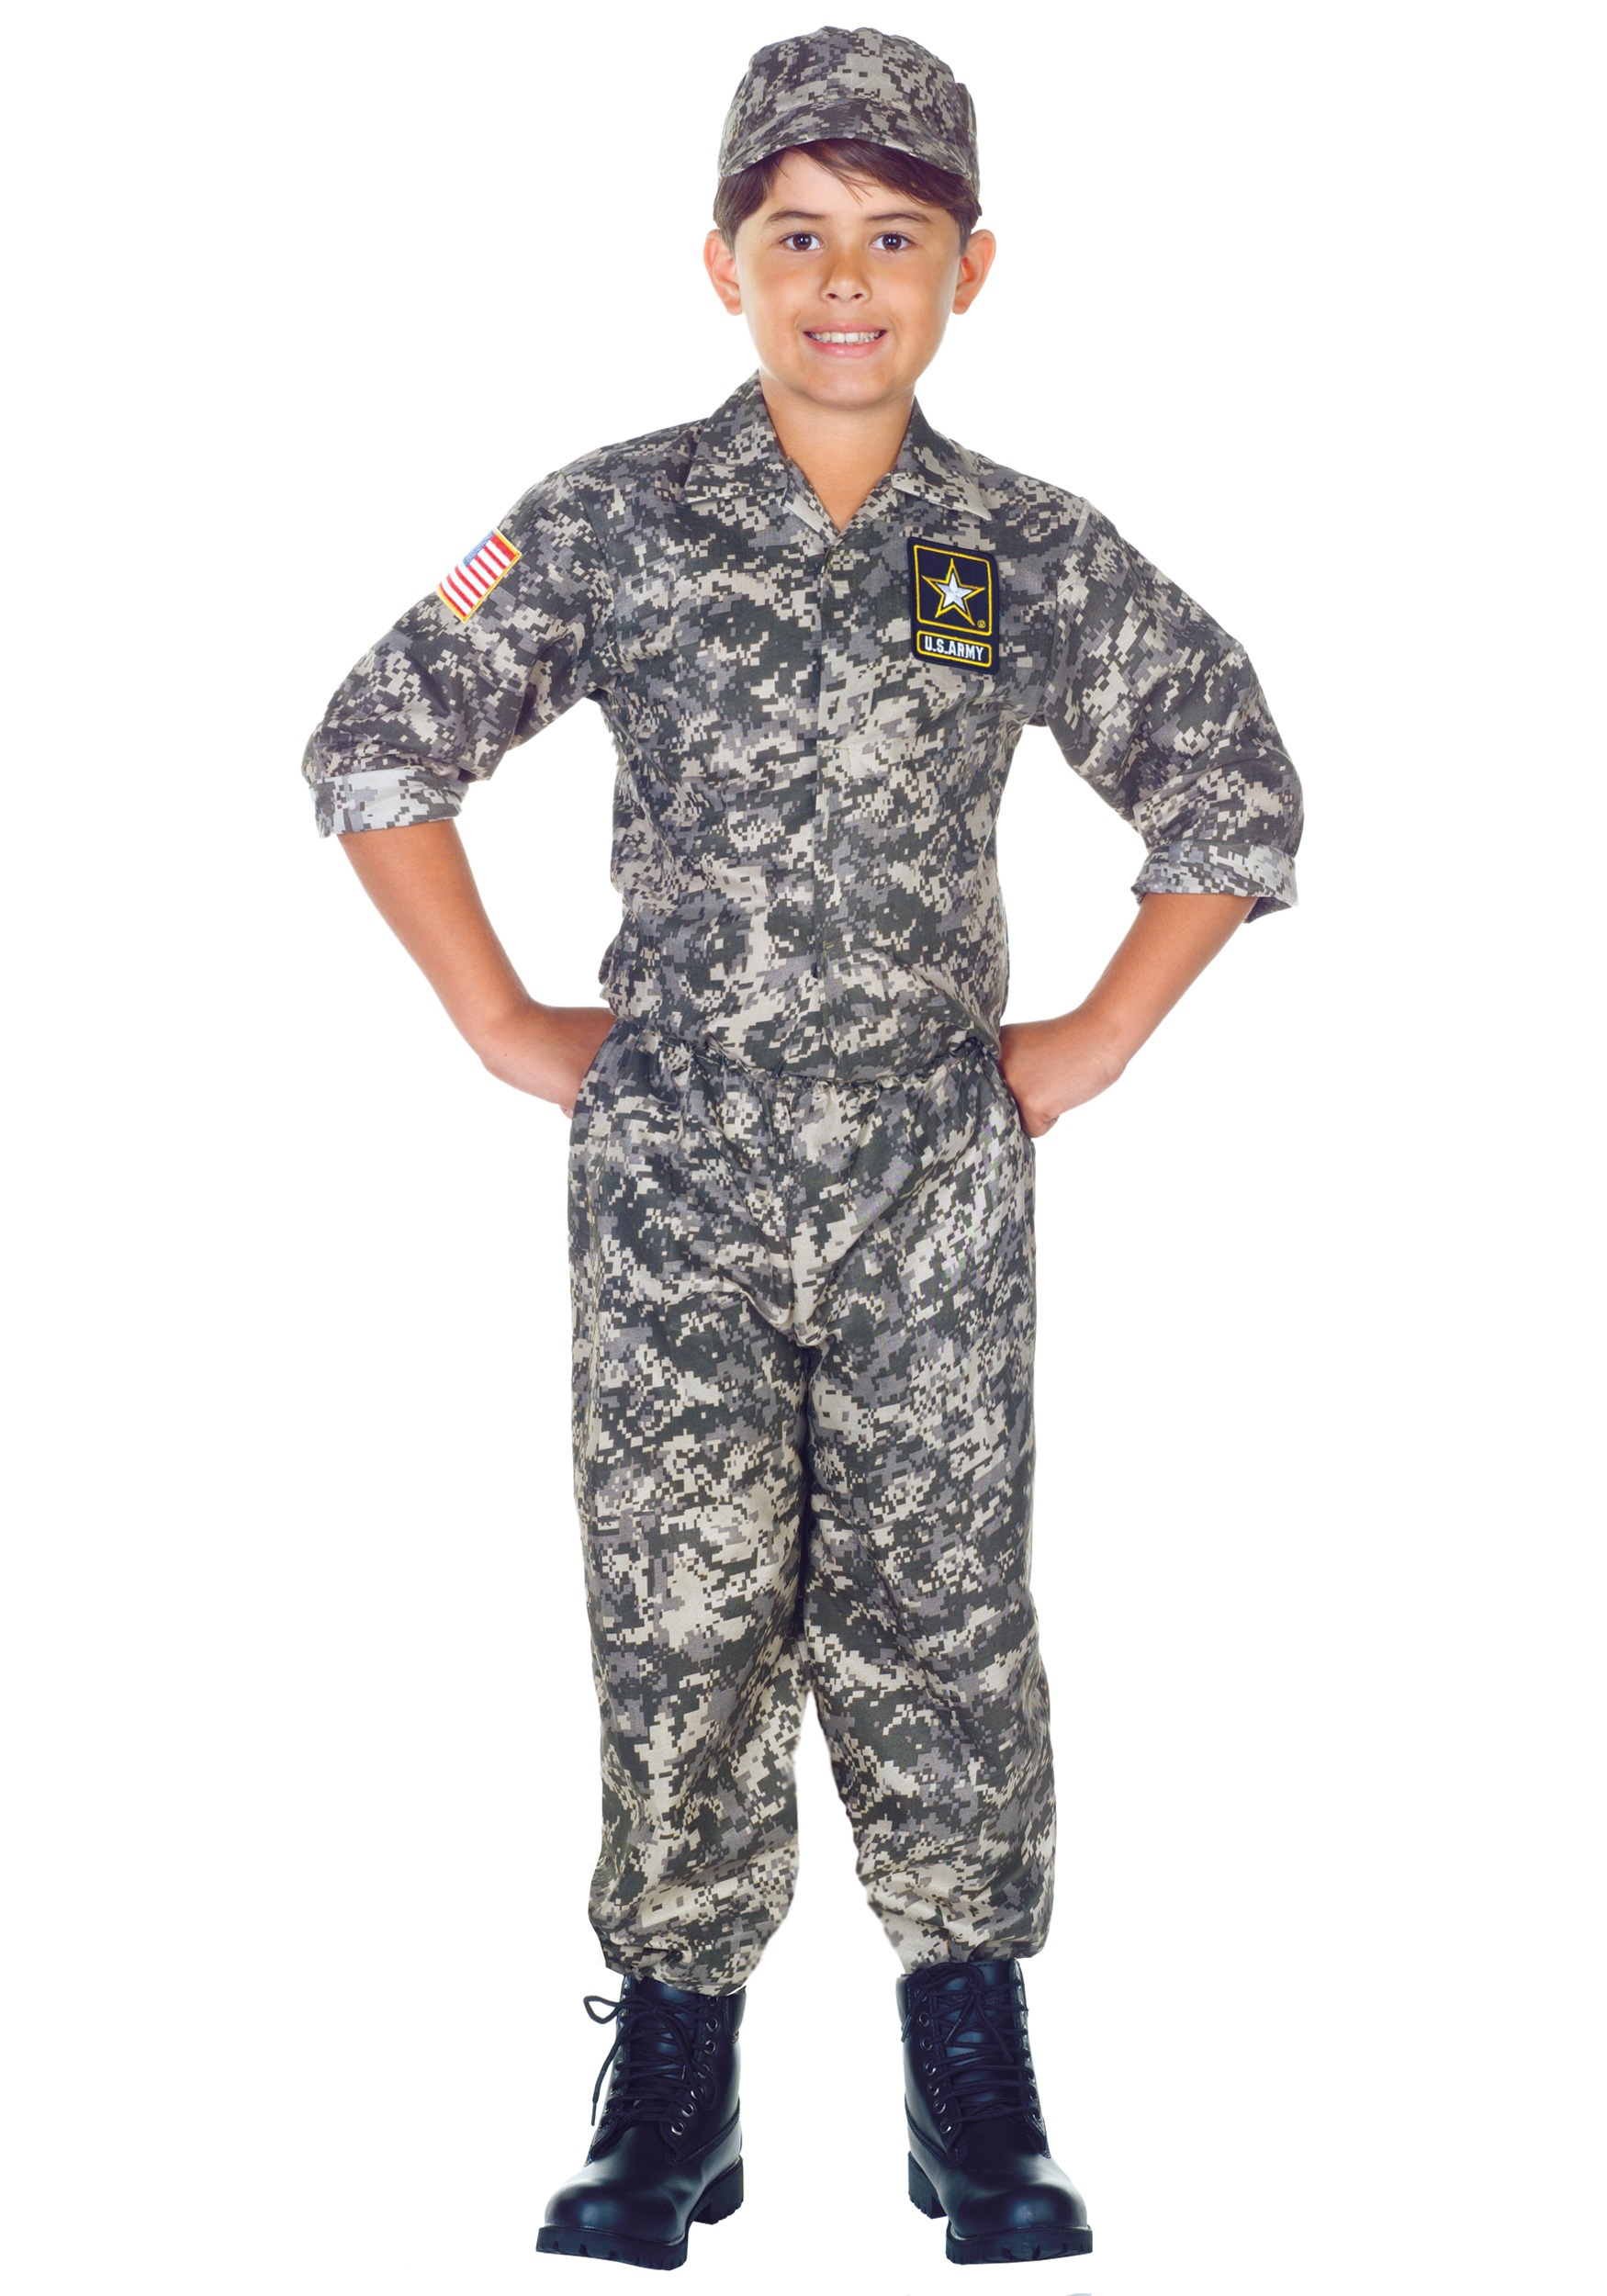 https://images.halloweencostumes.ca/products/12355/1-1/child-us-army-camo-costume.jpg